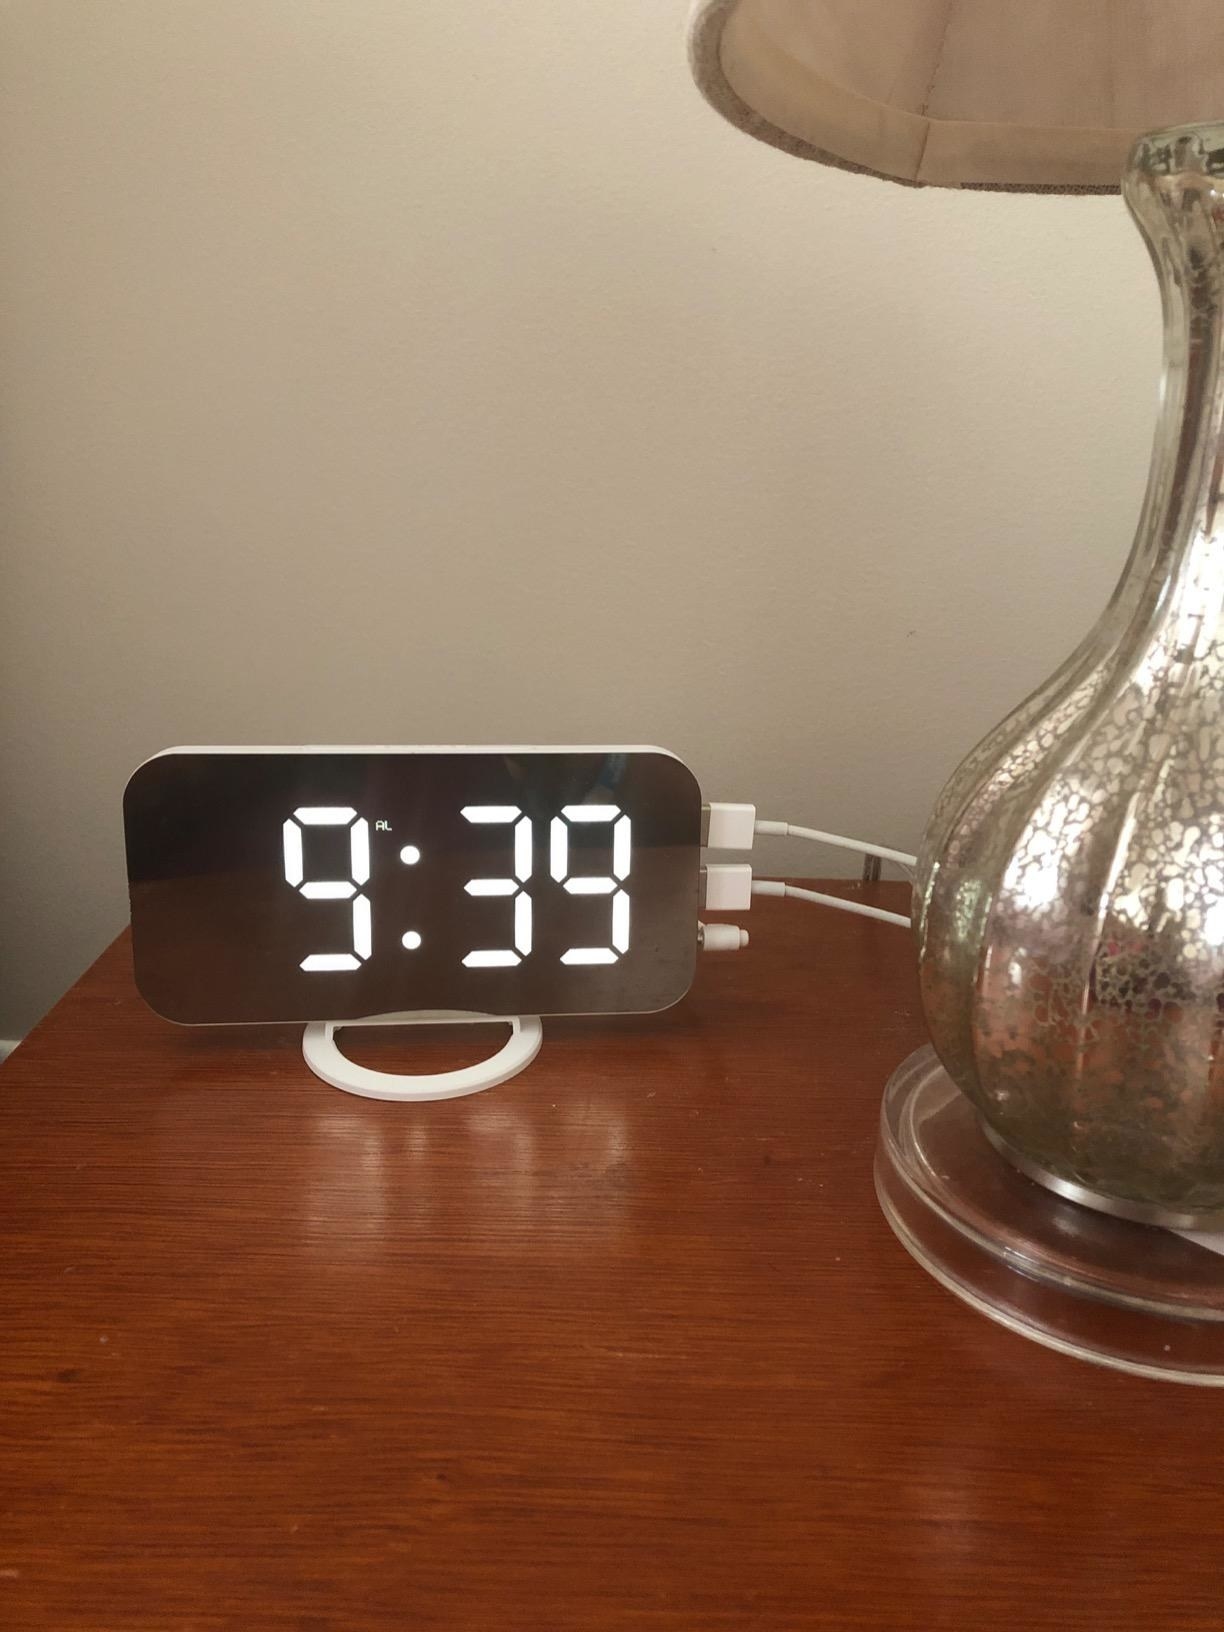 a review photo of the silver mirrored clock next to a lamp on a nightstand